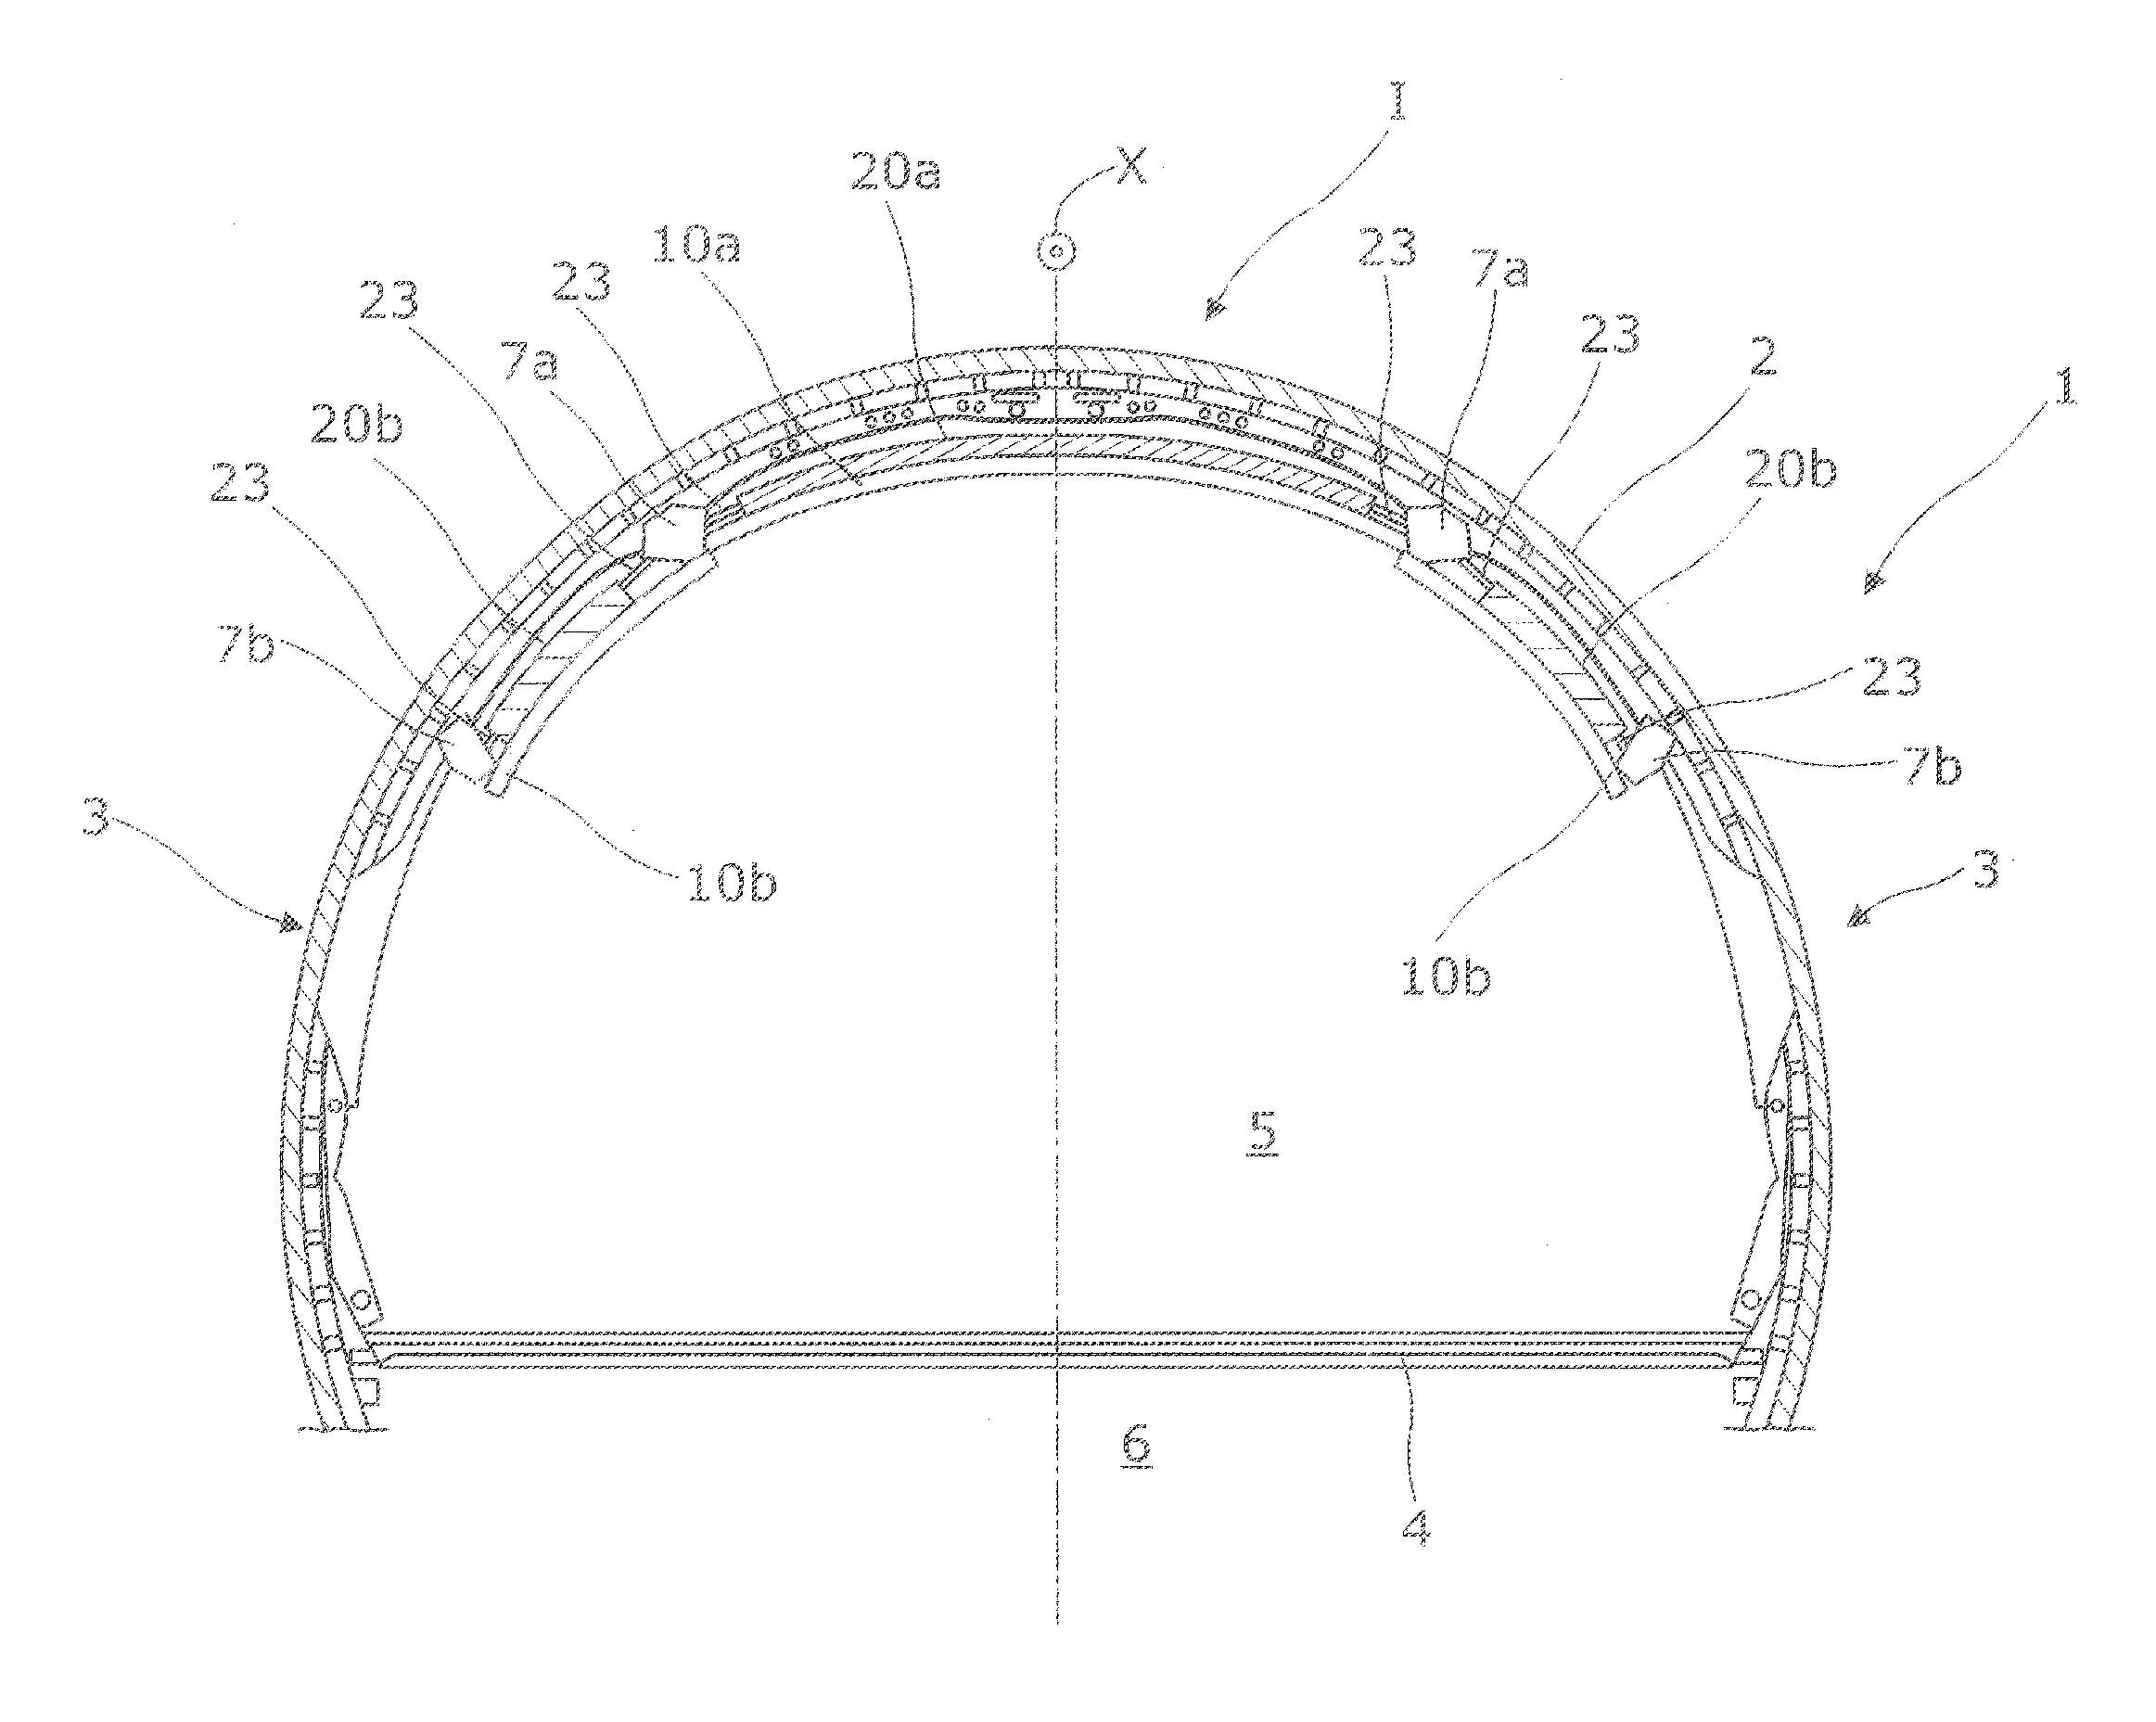 Lighting device for the interior furnishing of an aircraft cabin